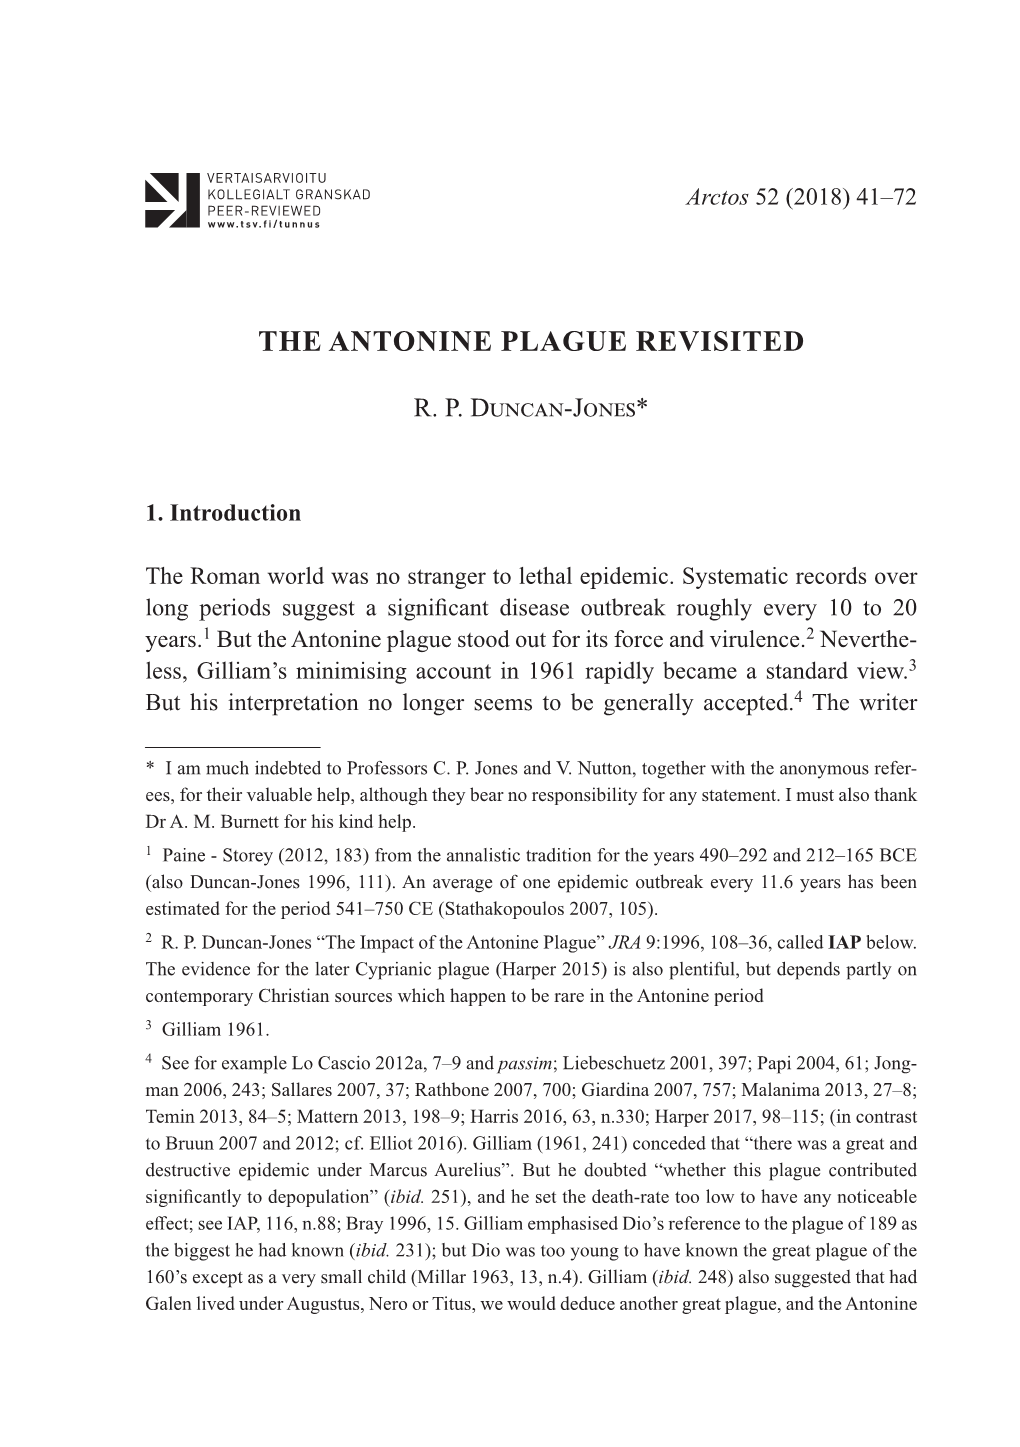 The Antonine Plague Revisited